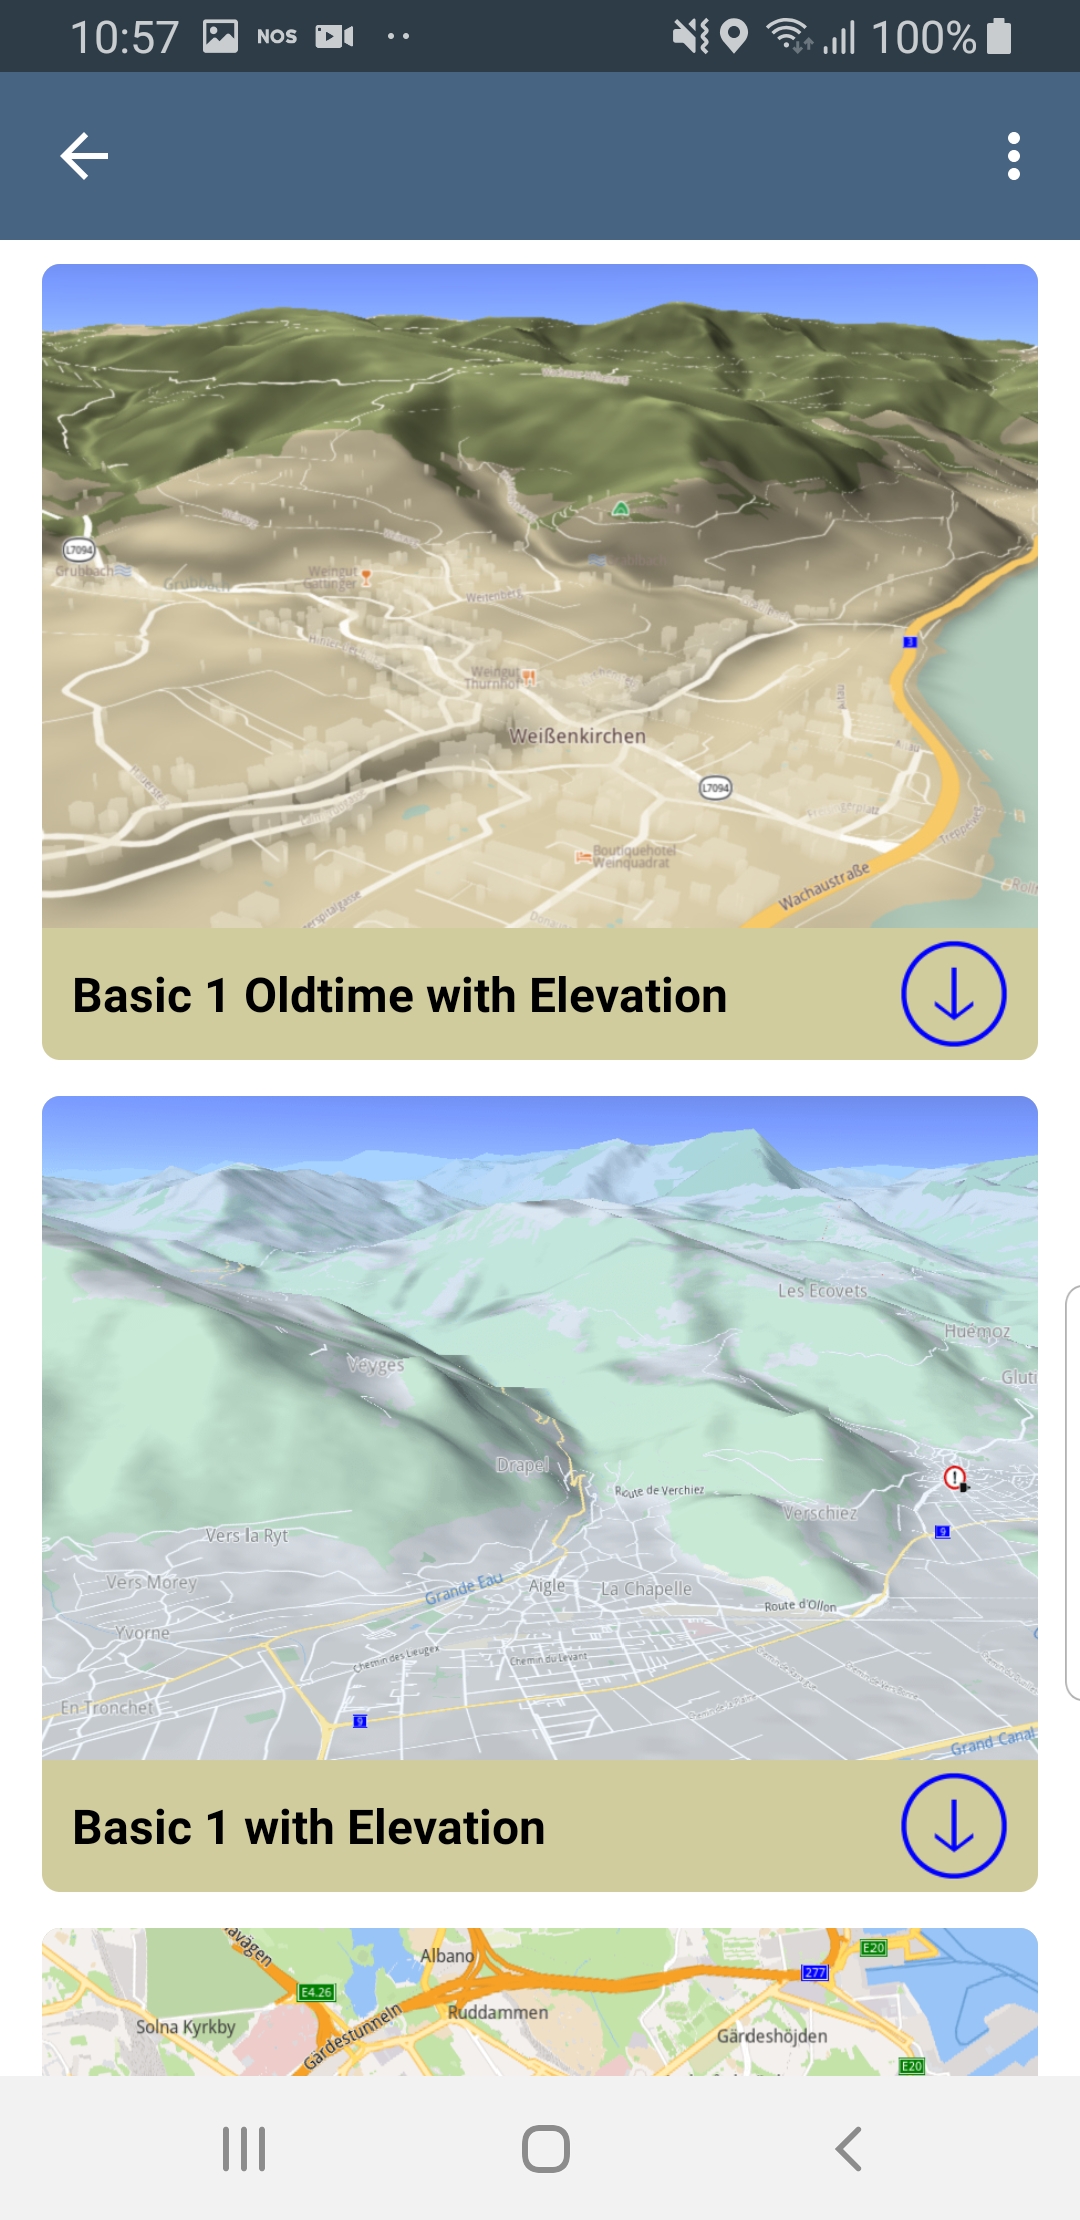 Android example map style screenshot